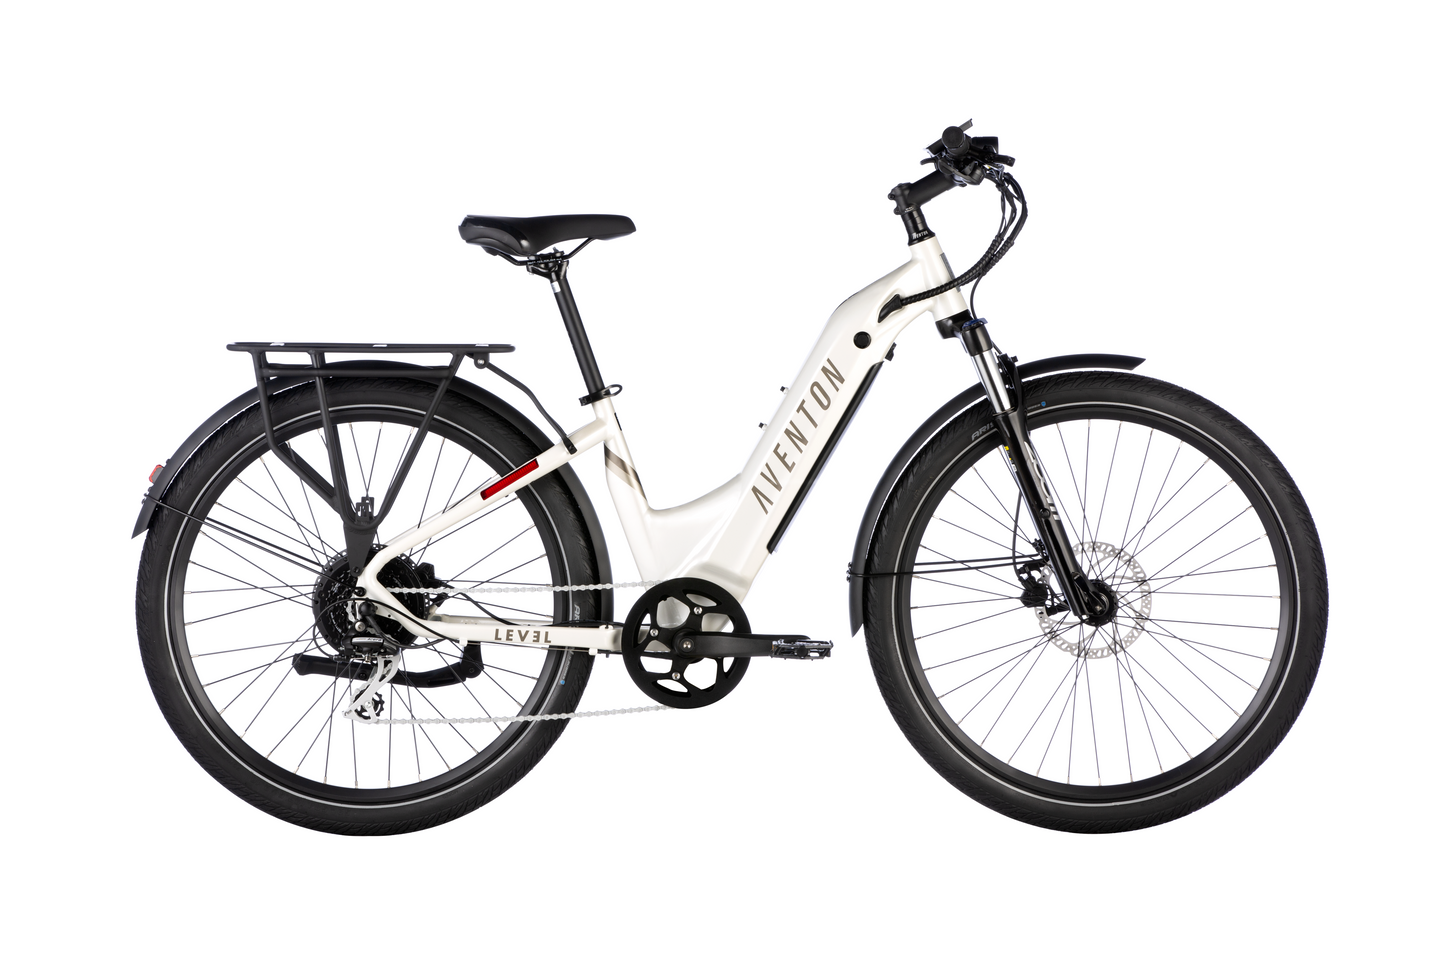 Aventon - LEVEL.2 Step Through - Polar White - R is a comfortable commuter eBike with a white and black color scheme.